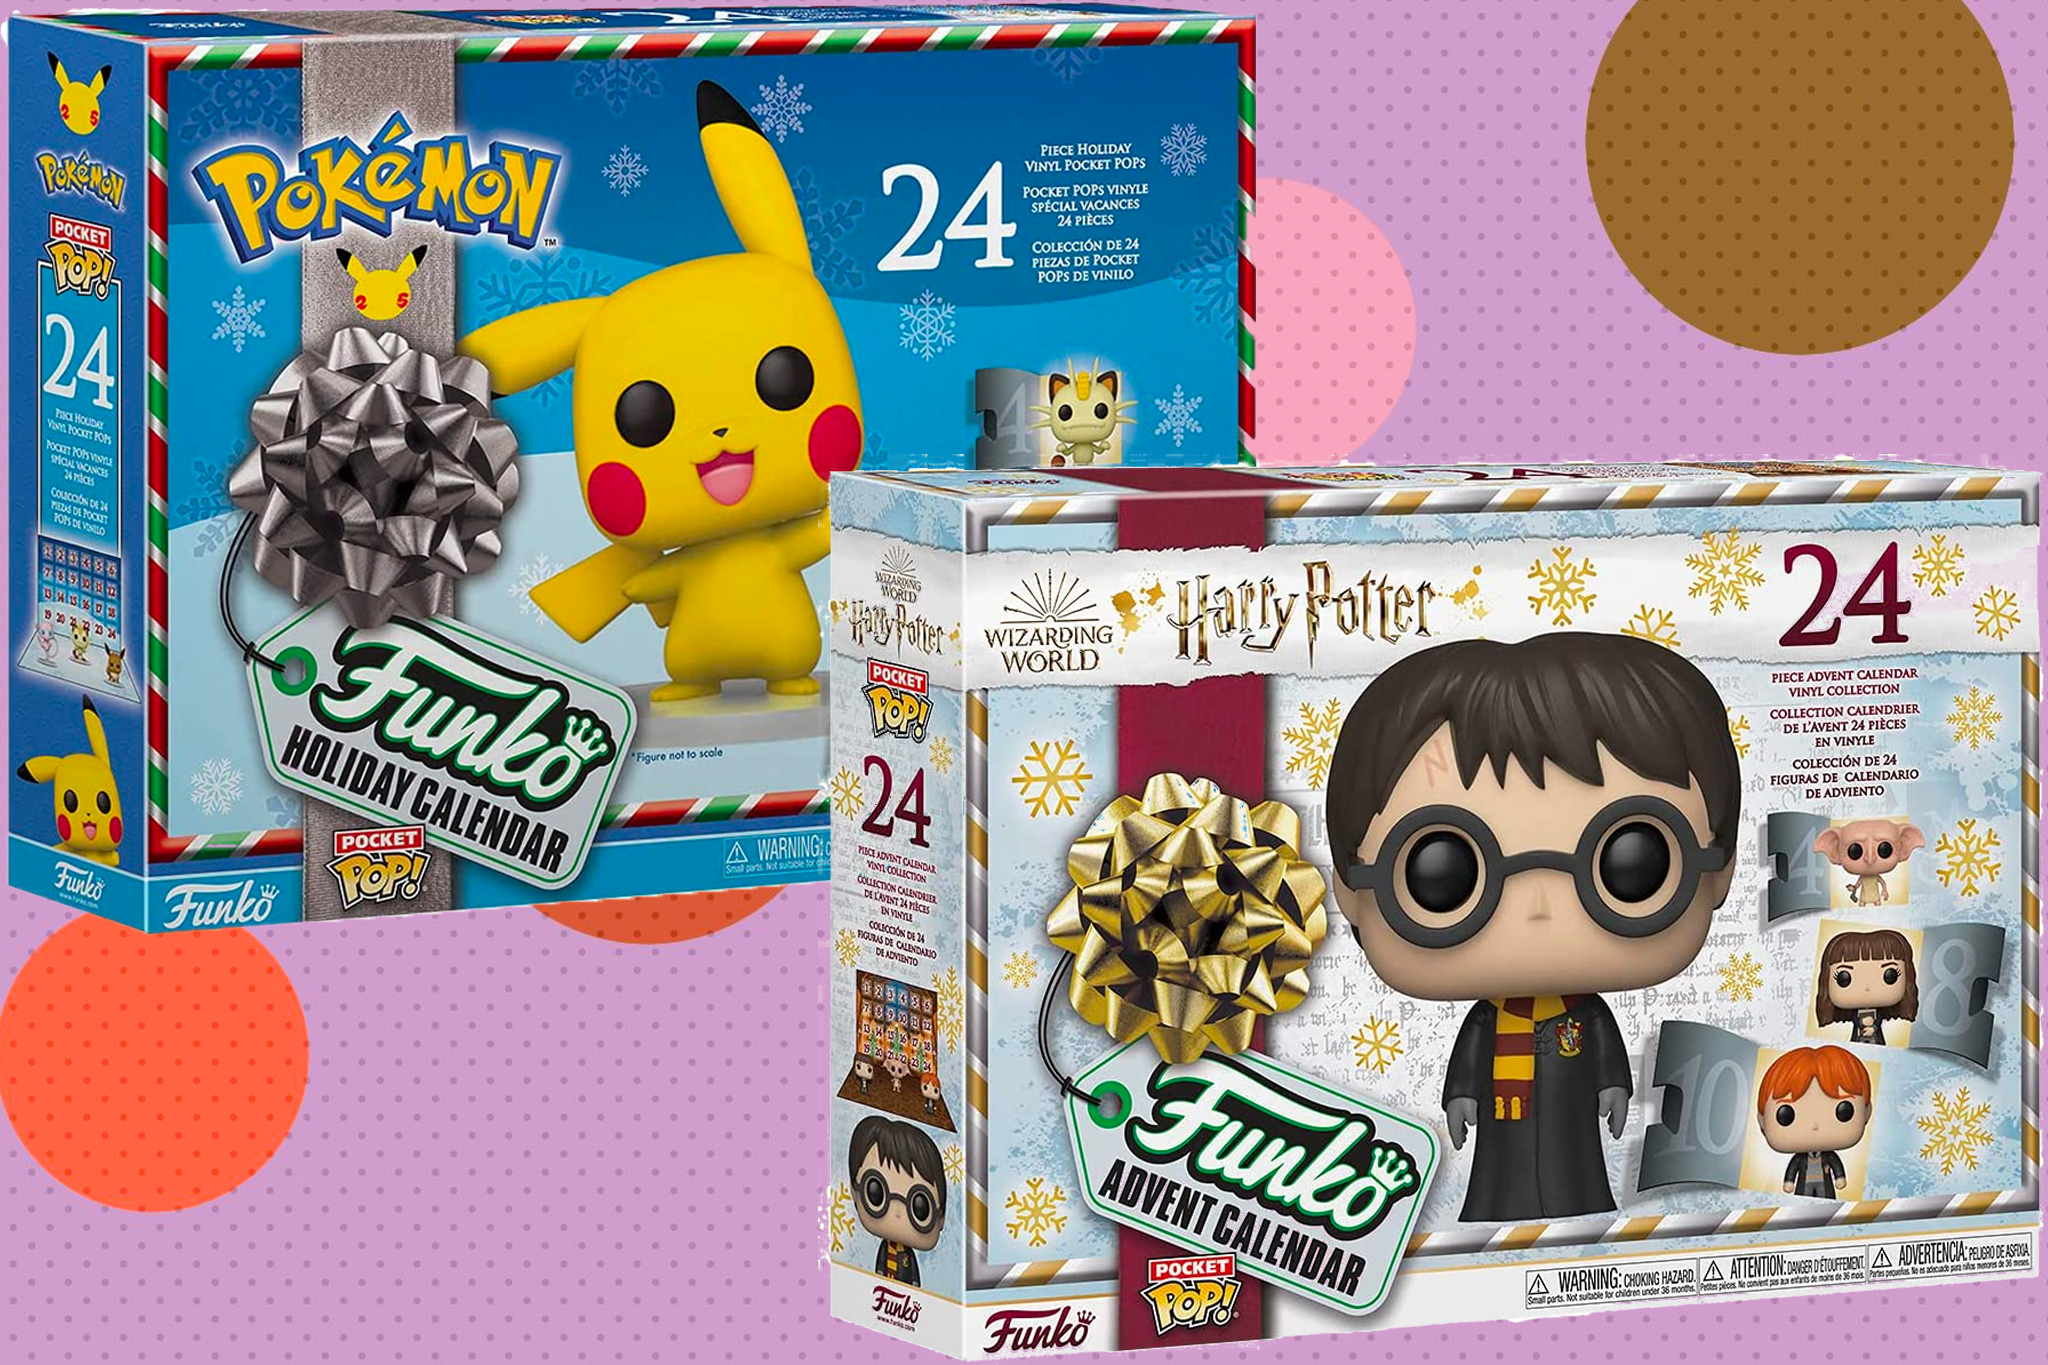 Get yer Pokemon and Harry Potter advent calendars!